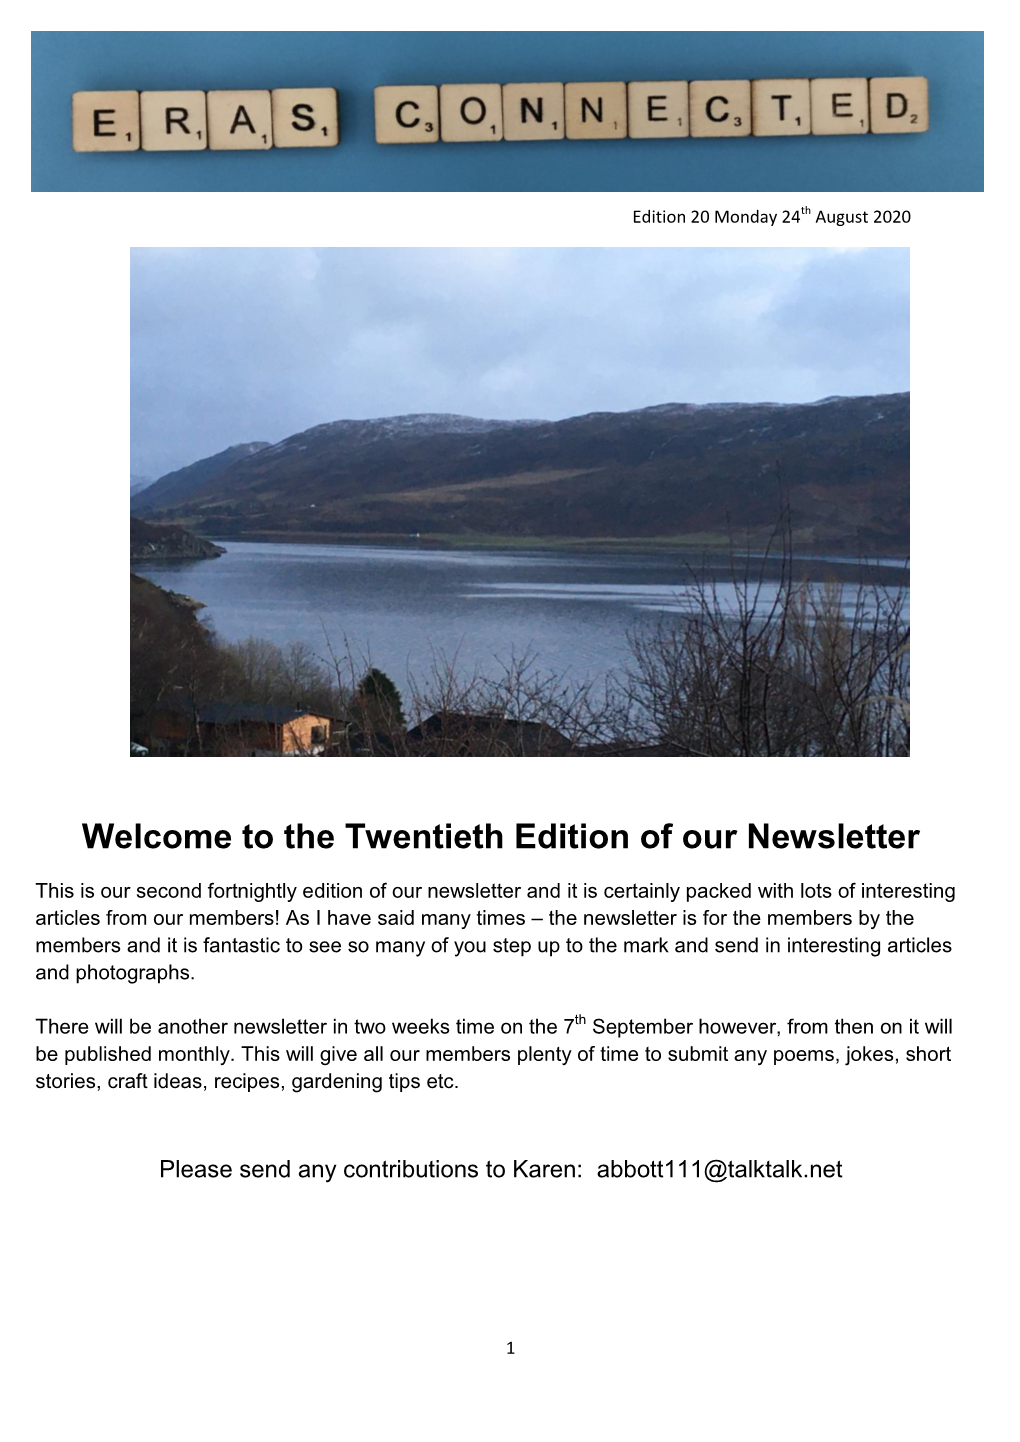 The Twentieth Edition of Our Newsletter